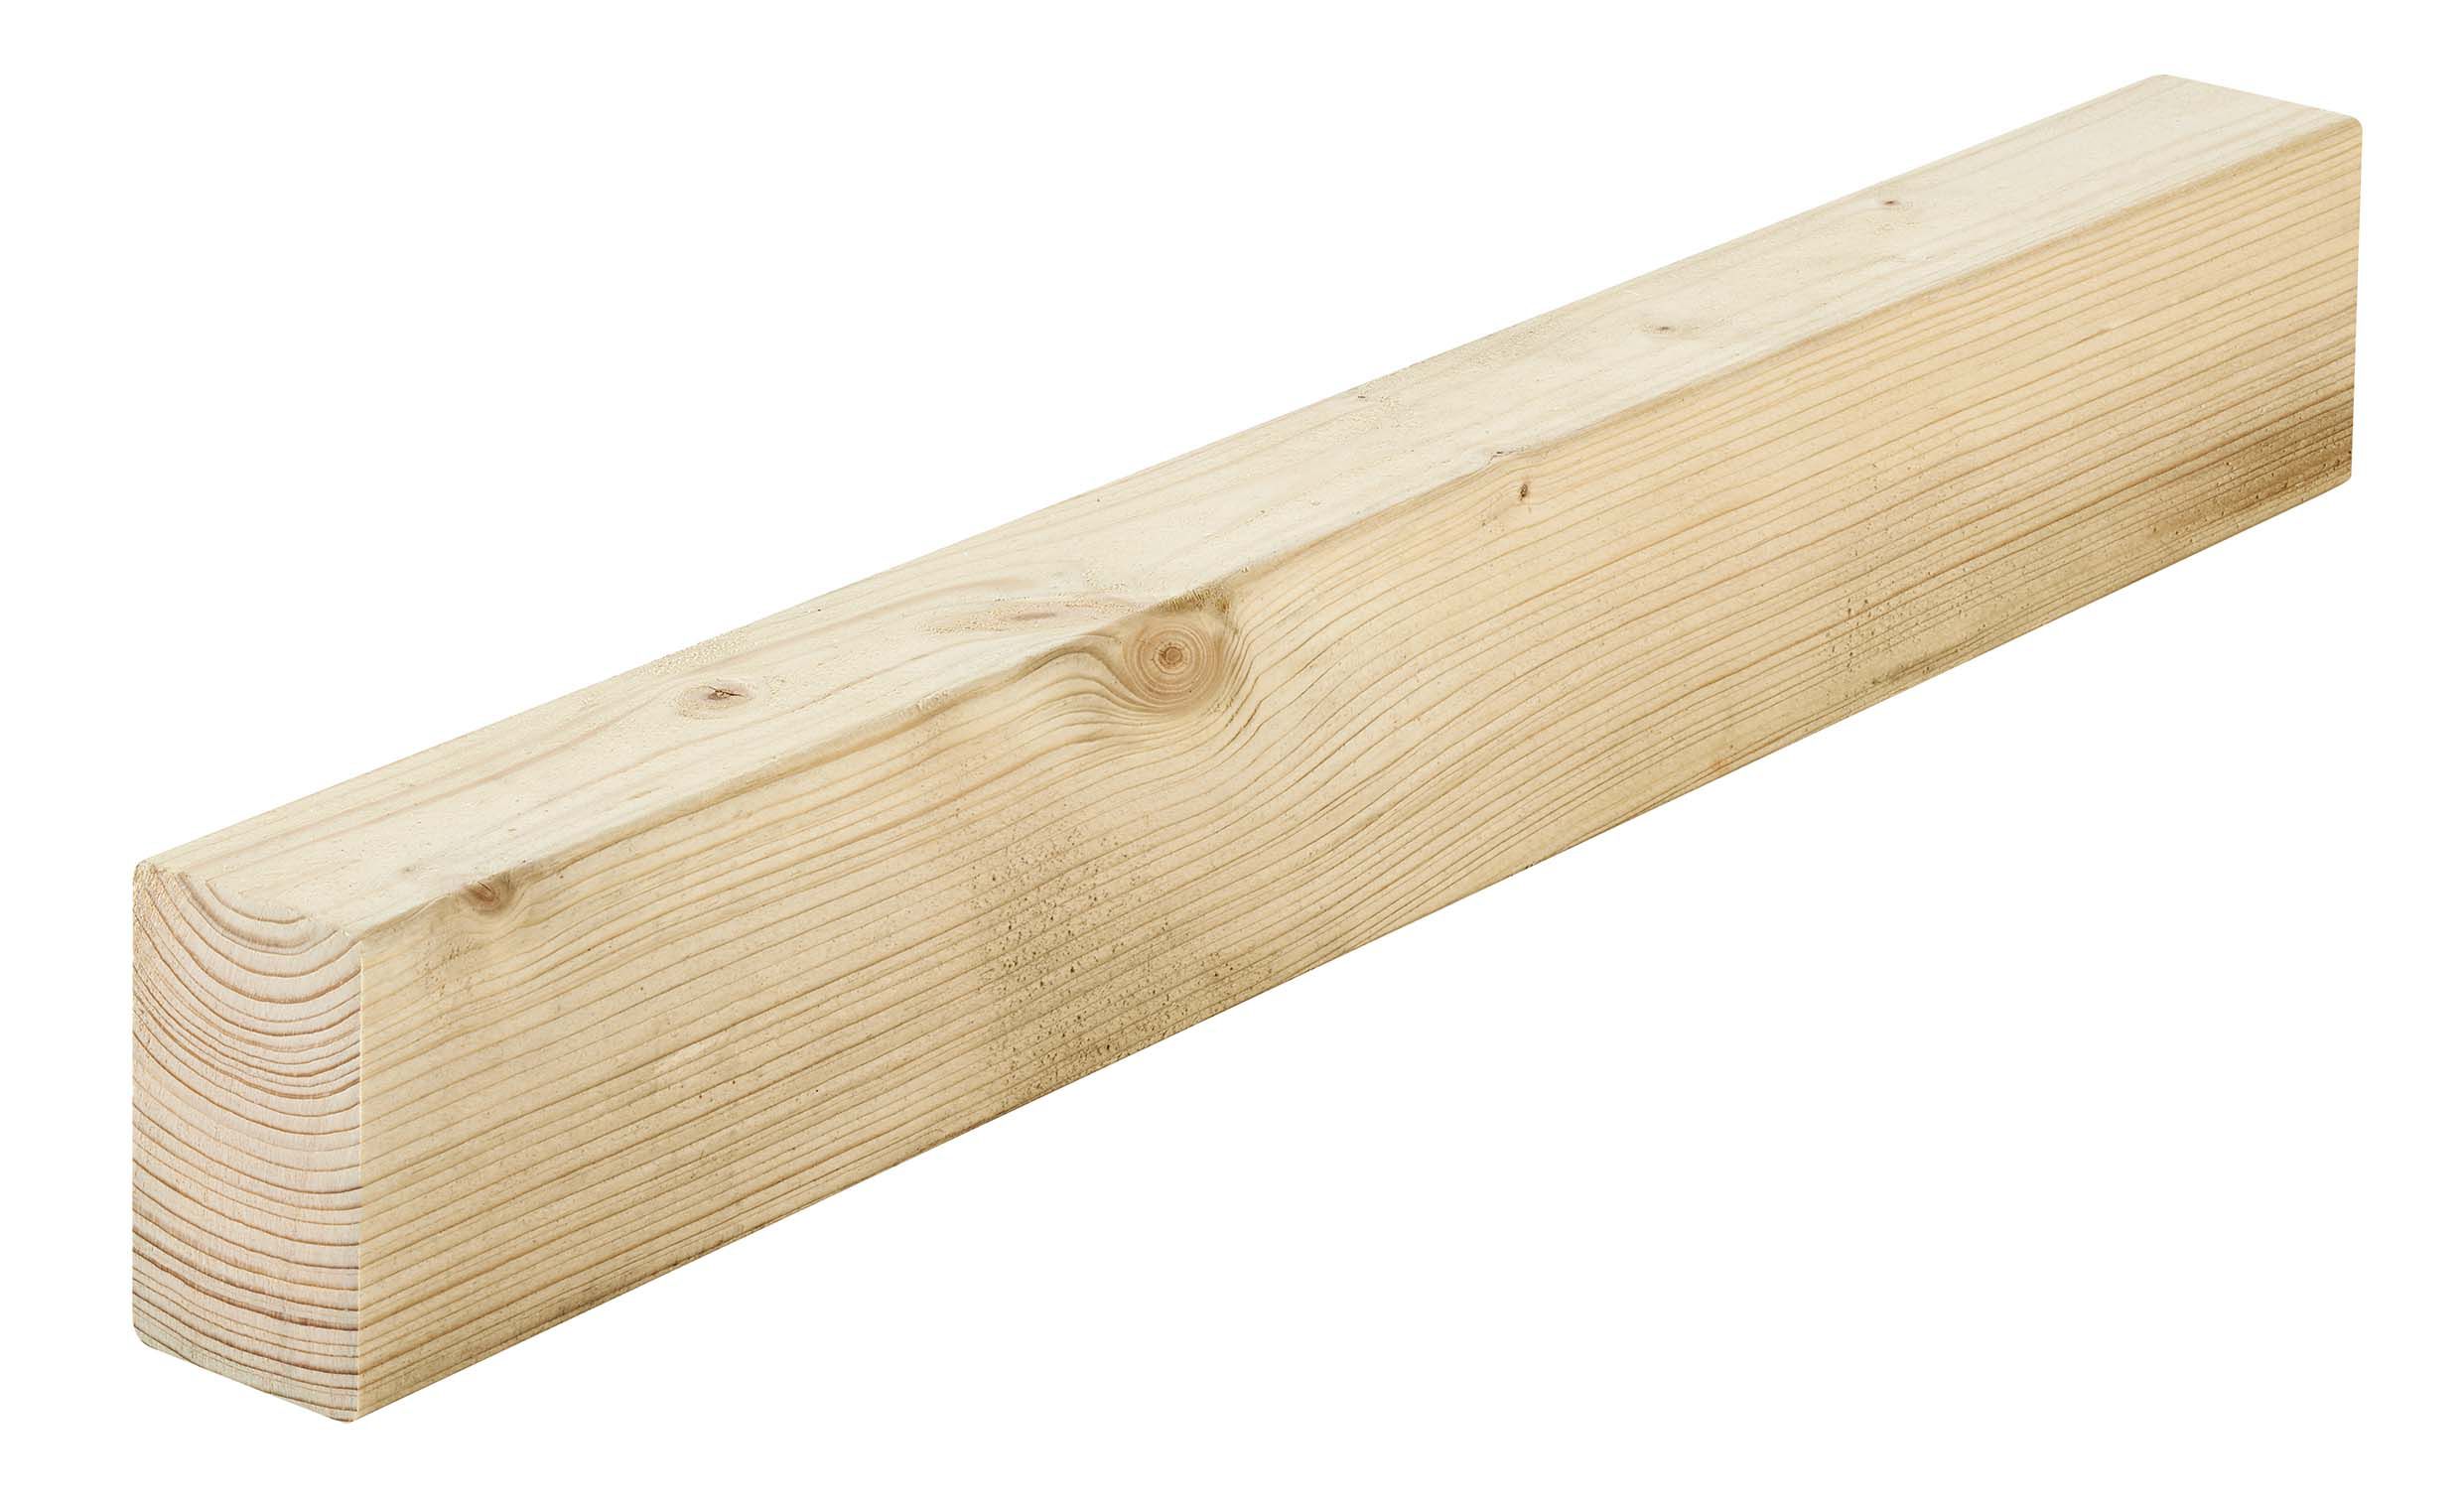 Treated Smooth Planed Round edge Treated Carcassing timber (L)2.4m (W)70mm (T)45mm, Pack of 6